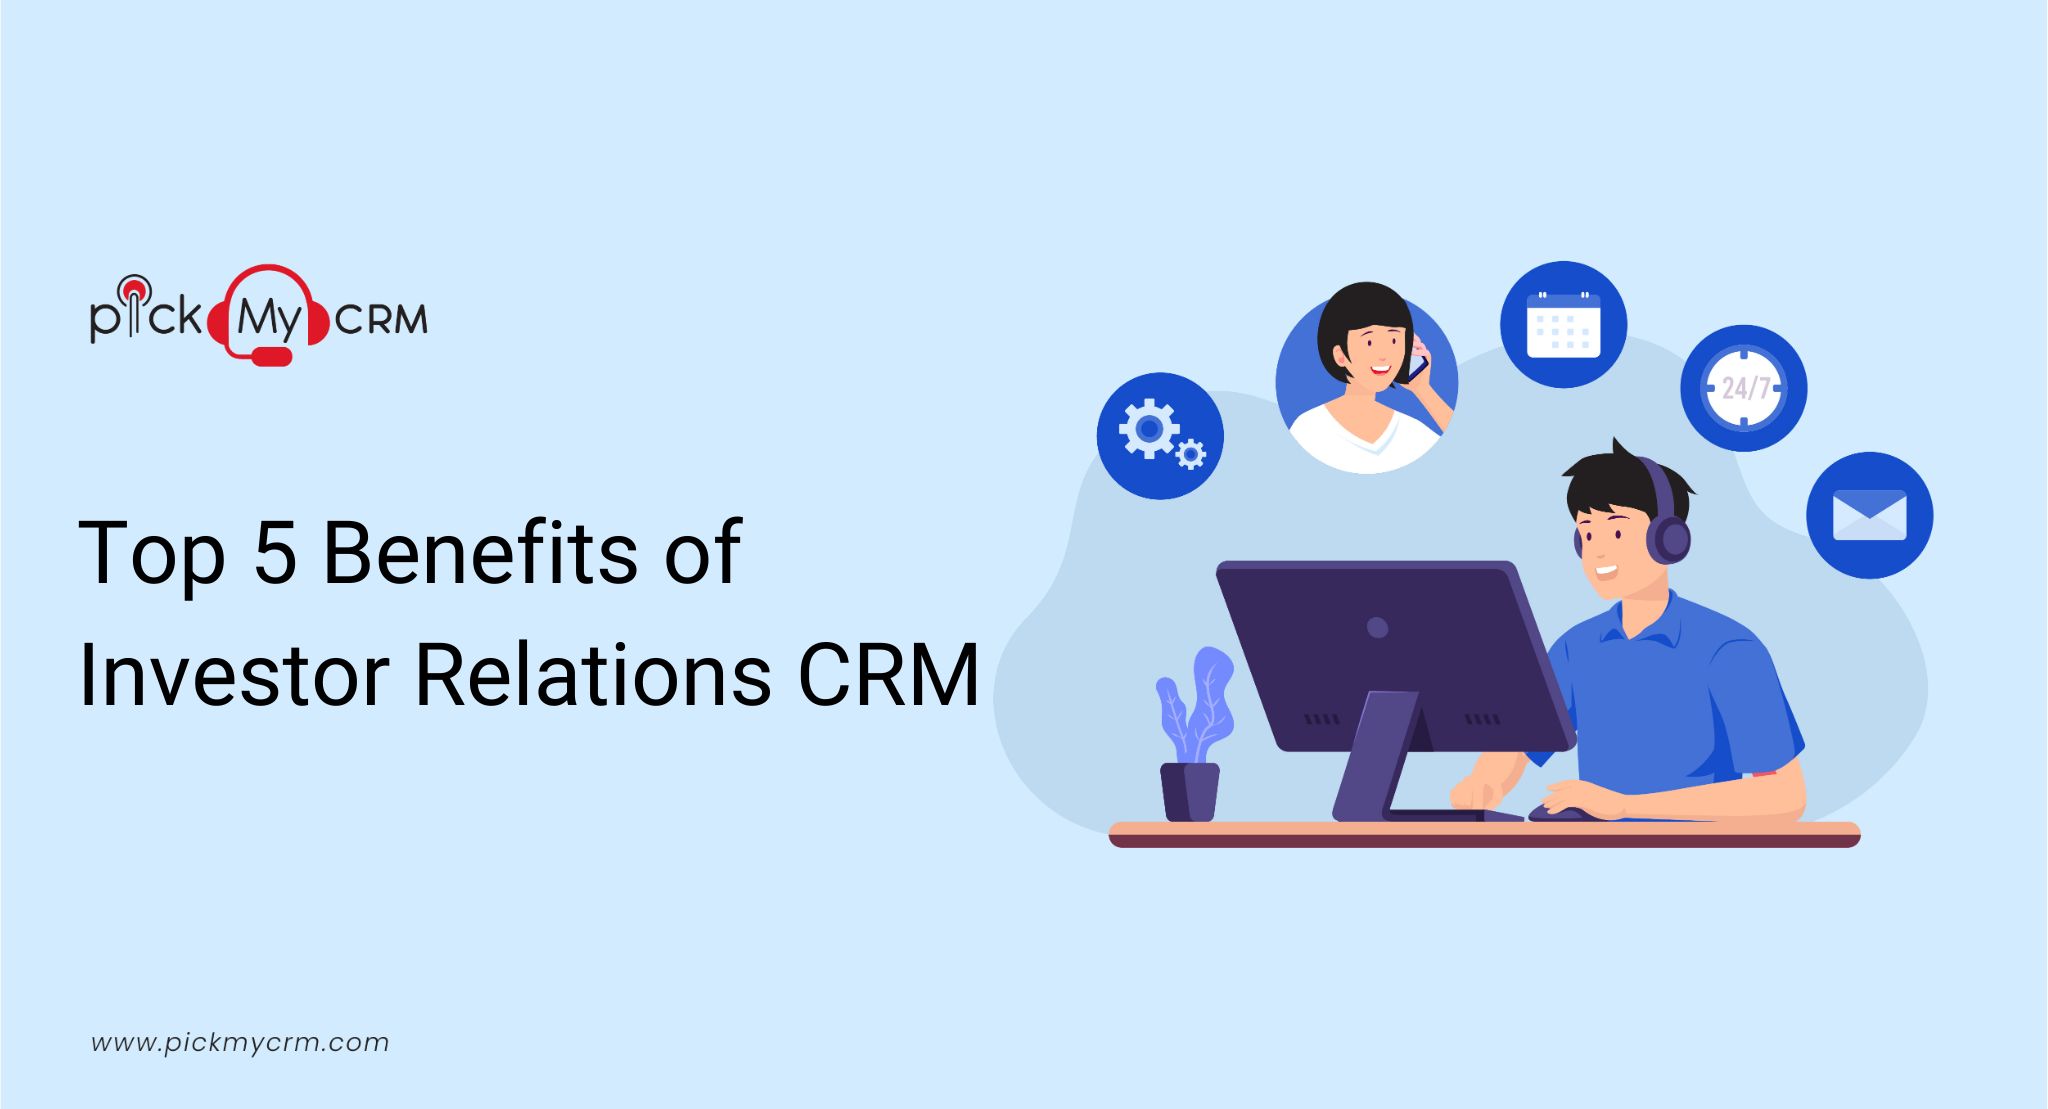 Top 5 Benefits of CRM for Investor Relations